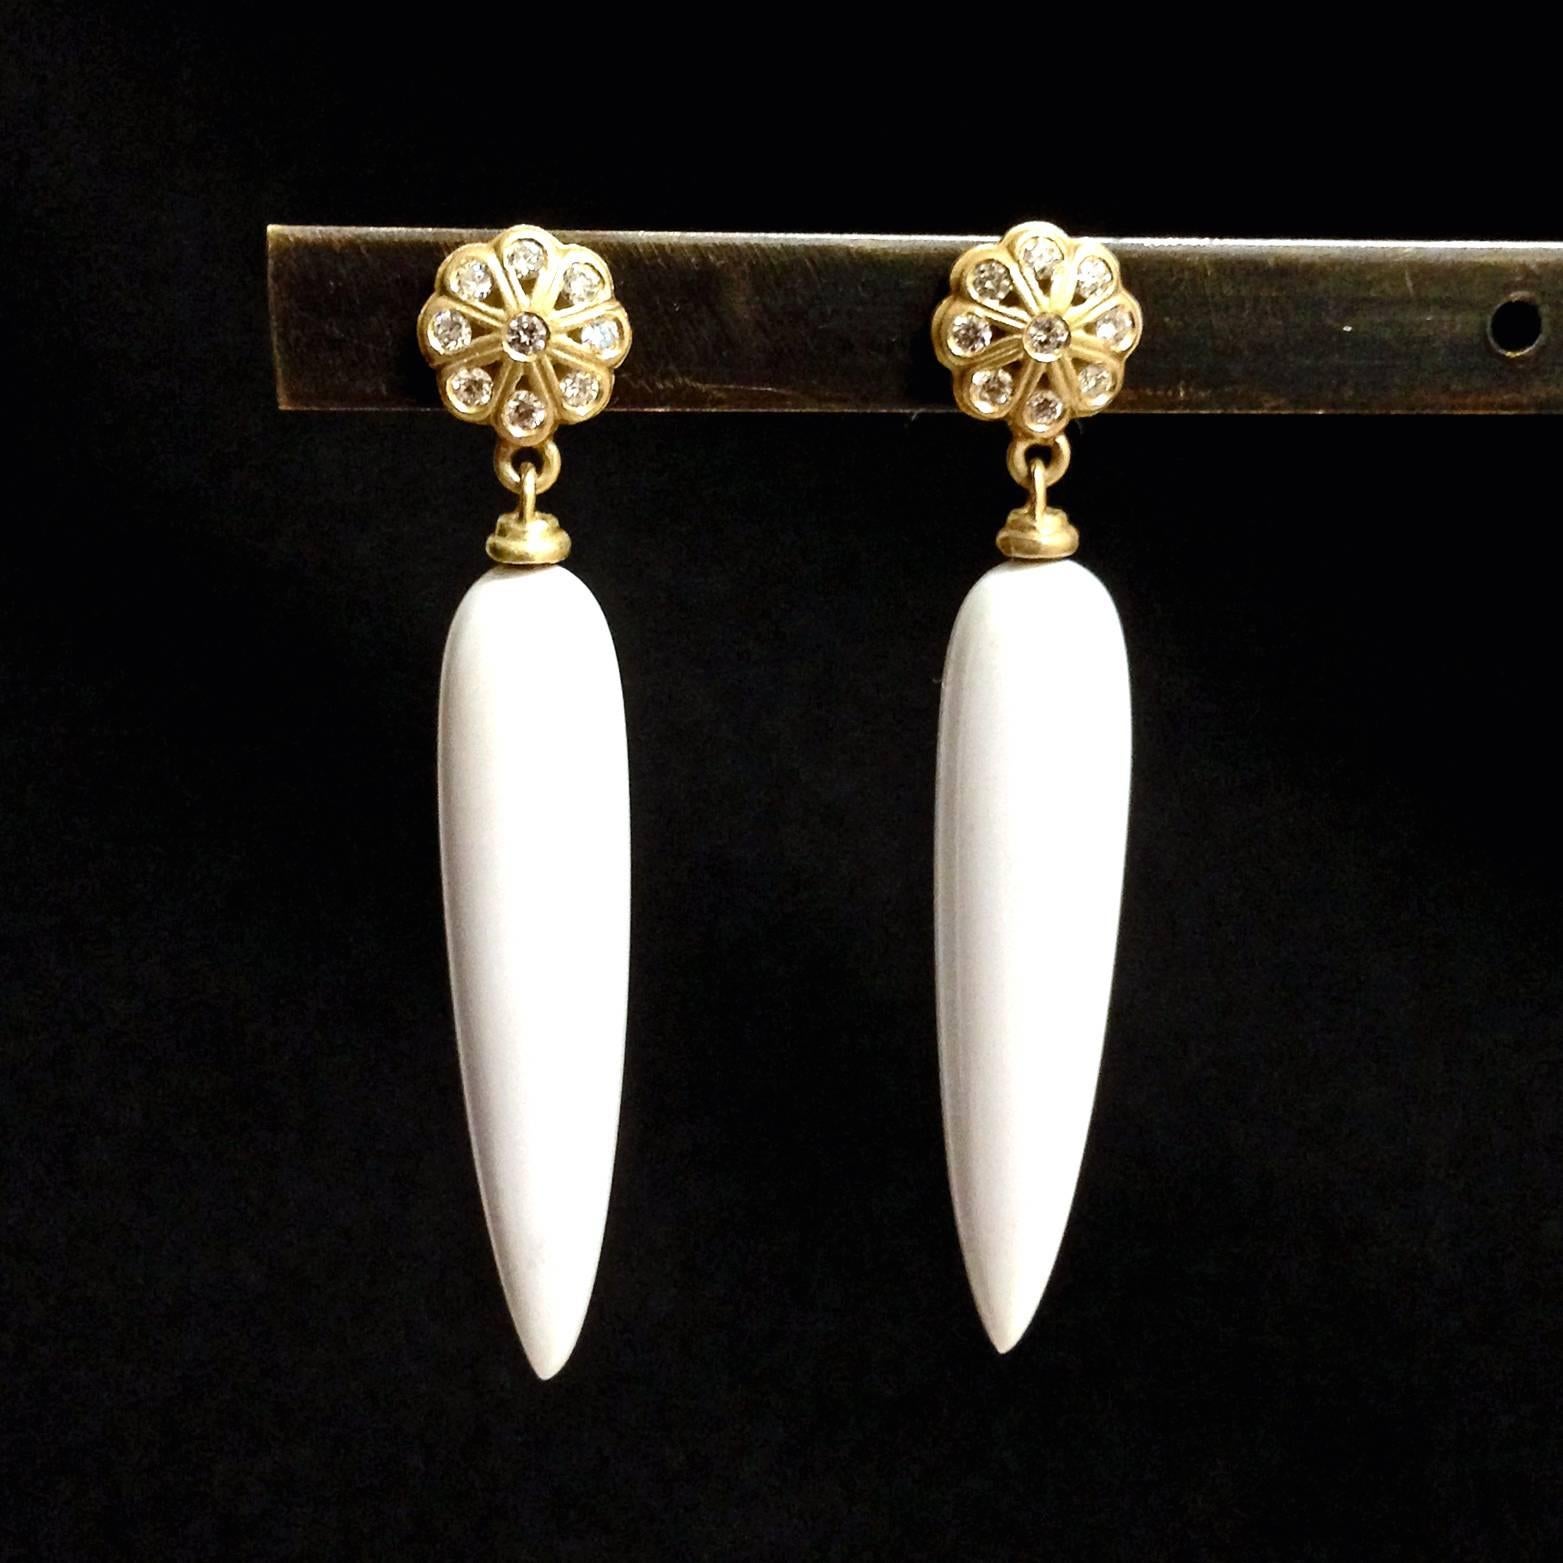 Drop Earrings handcrafted in matte-finished 18k yellow gold with smooth white agate drops and eighteen white round brilliant-cut diamonds.